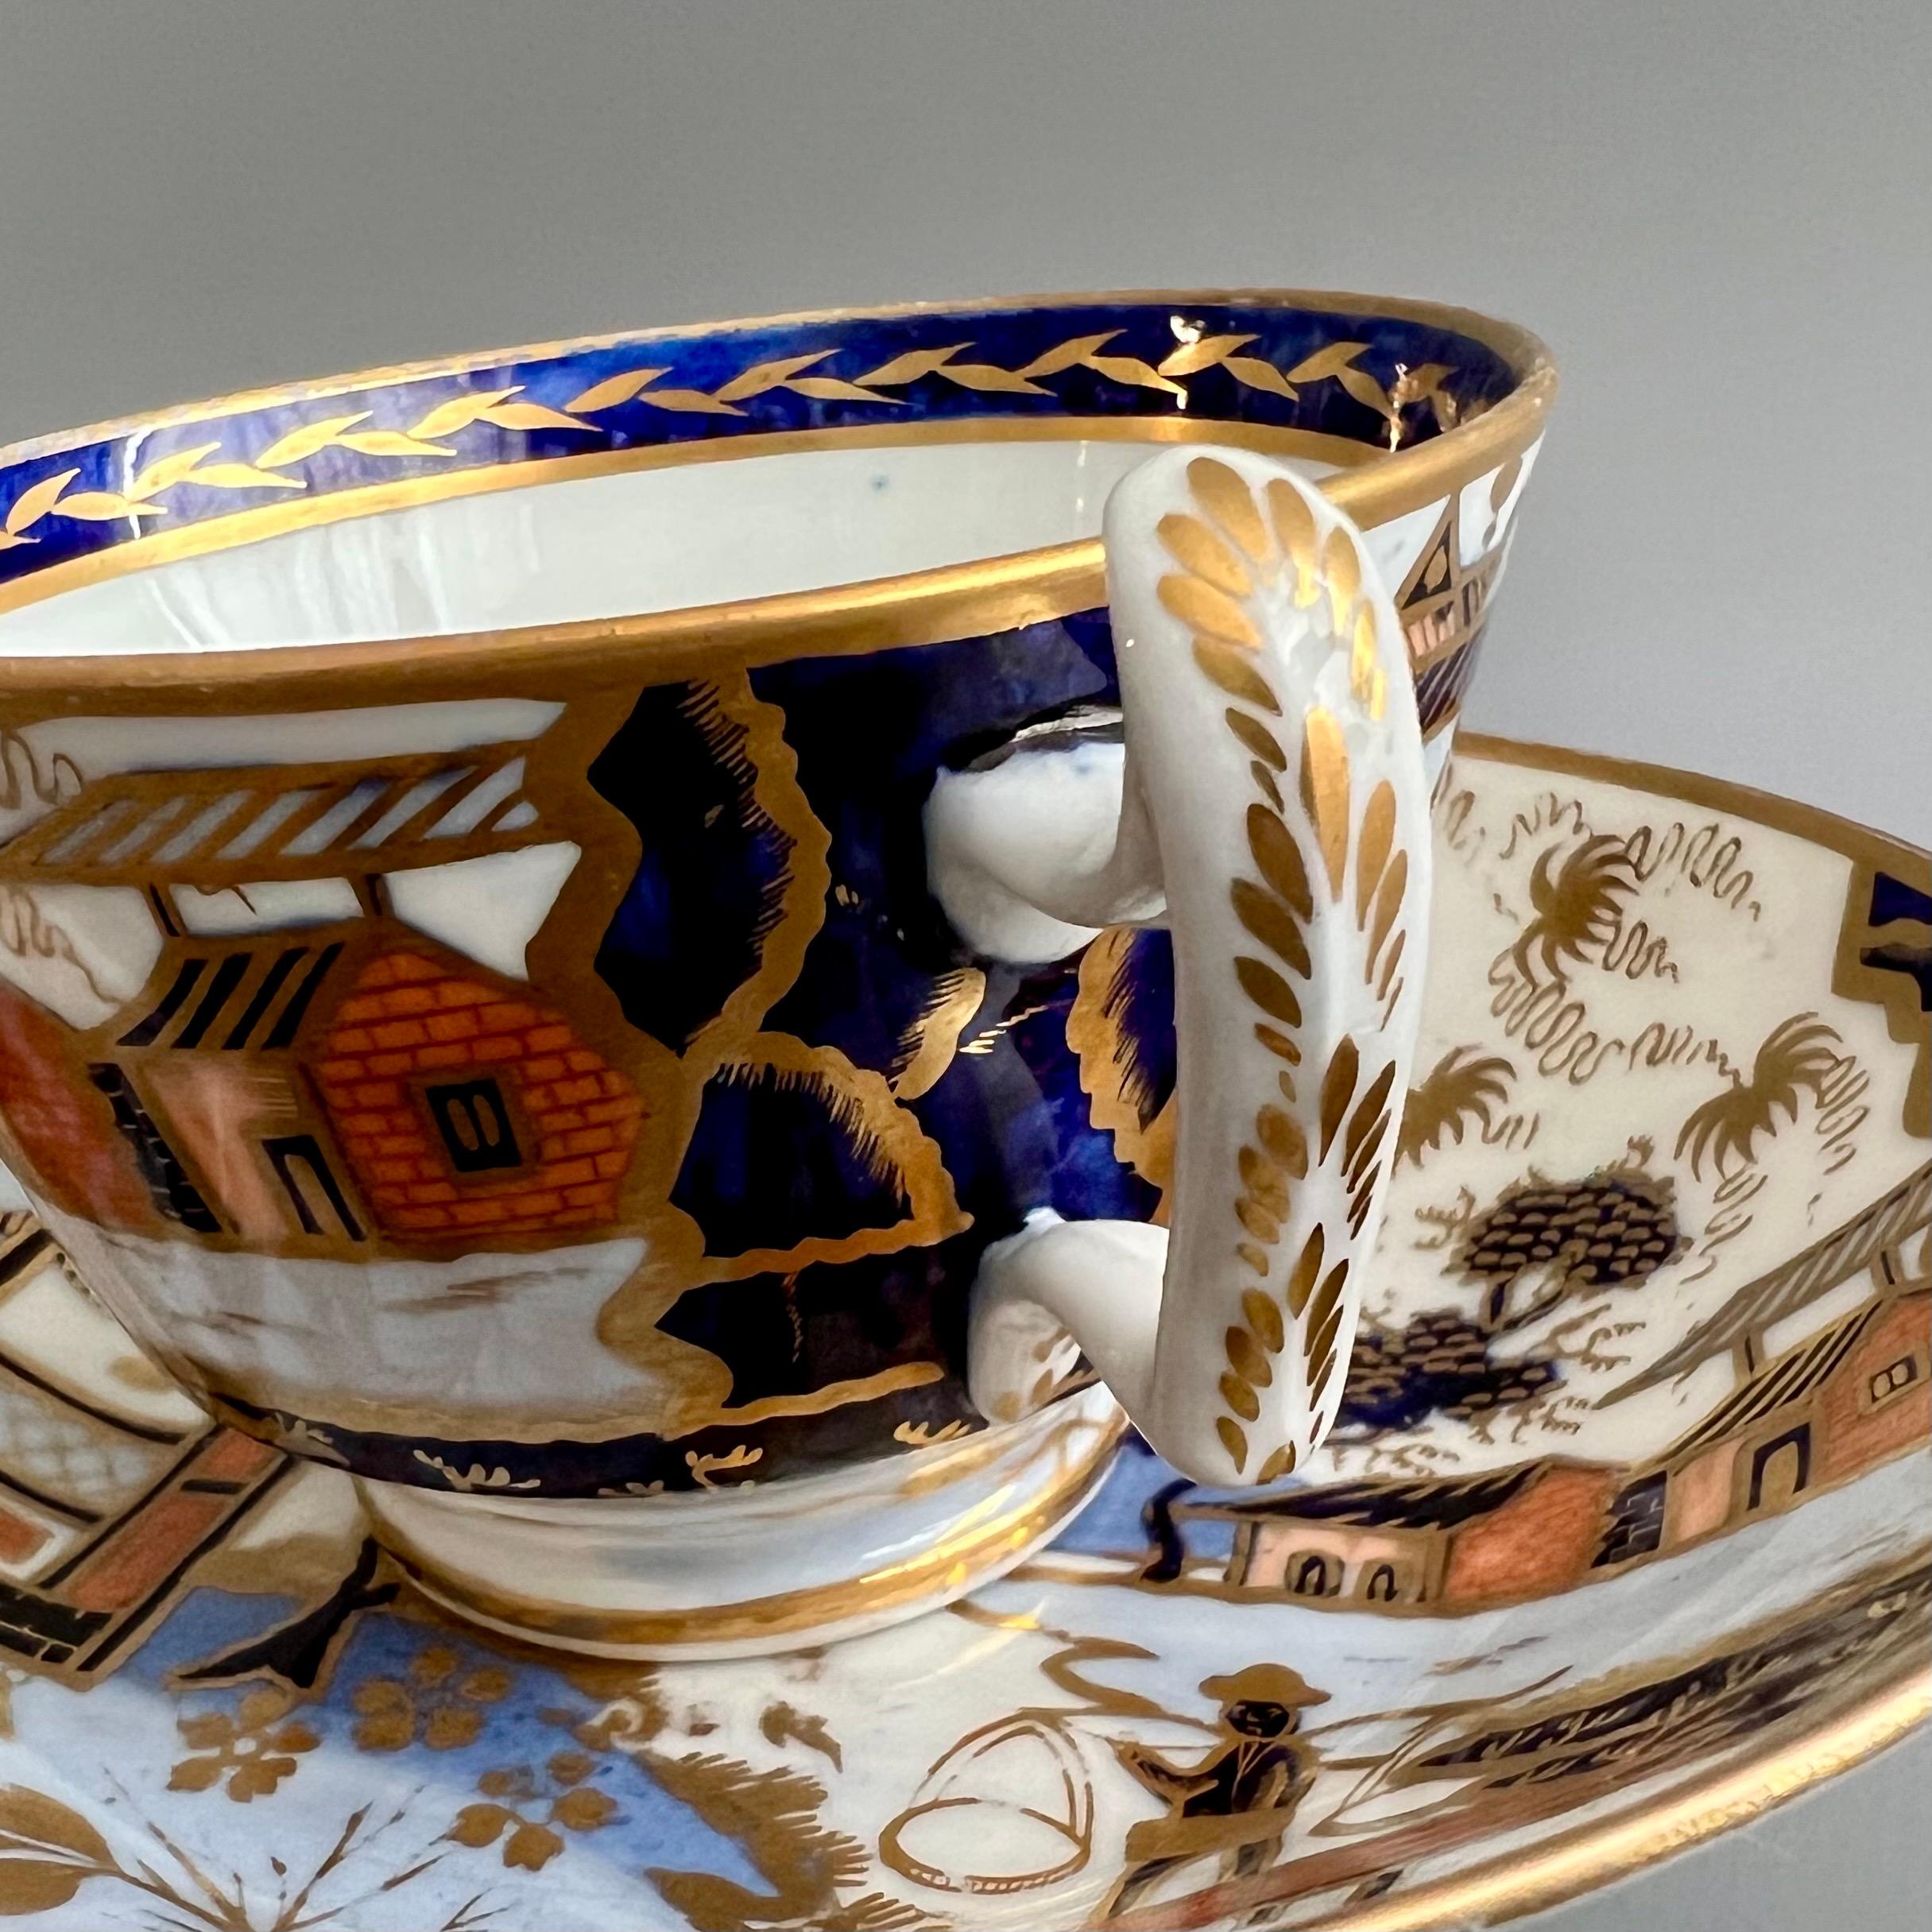 New Hall Porcelain Teacup, Chinoiserie Water Carrier Pattern 1163, Ca 1815 7